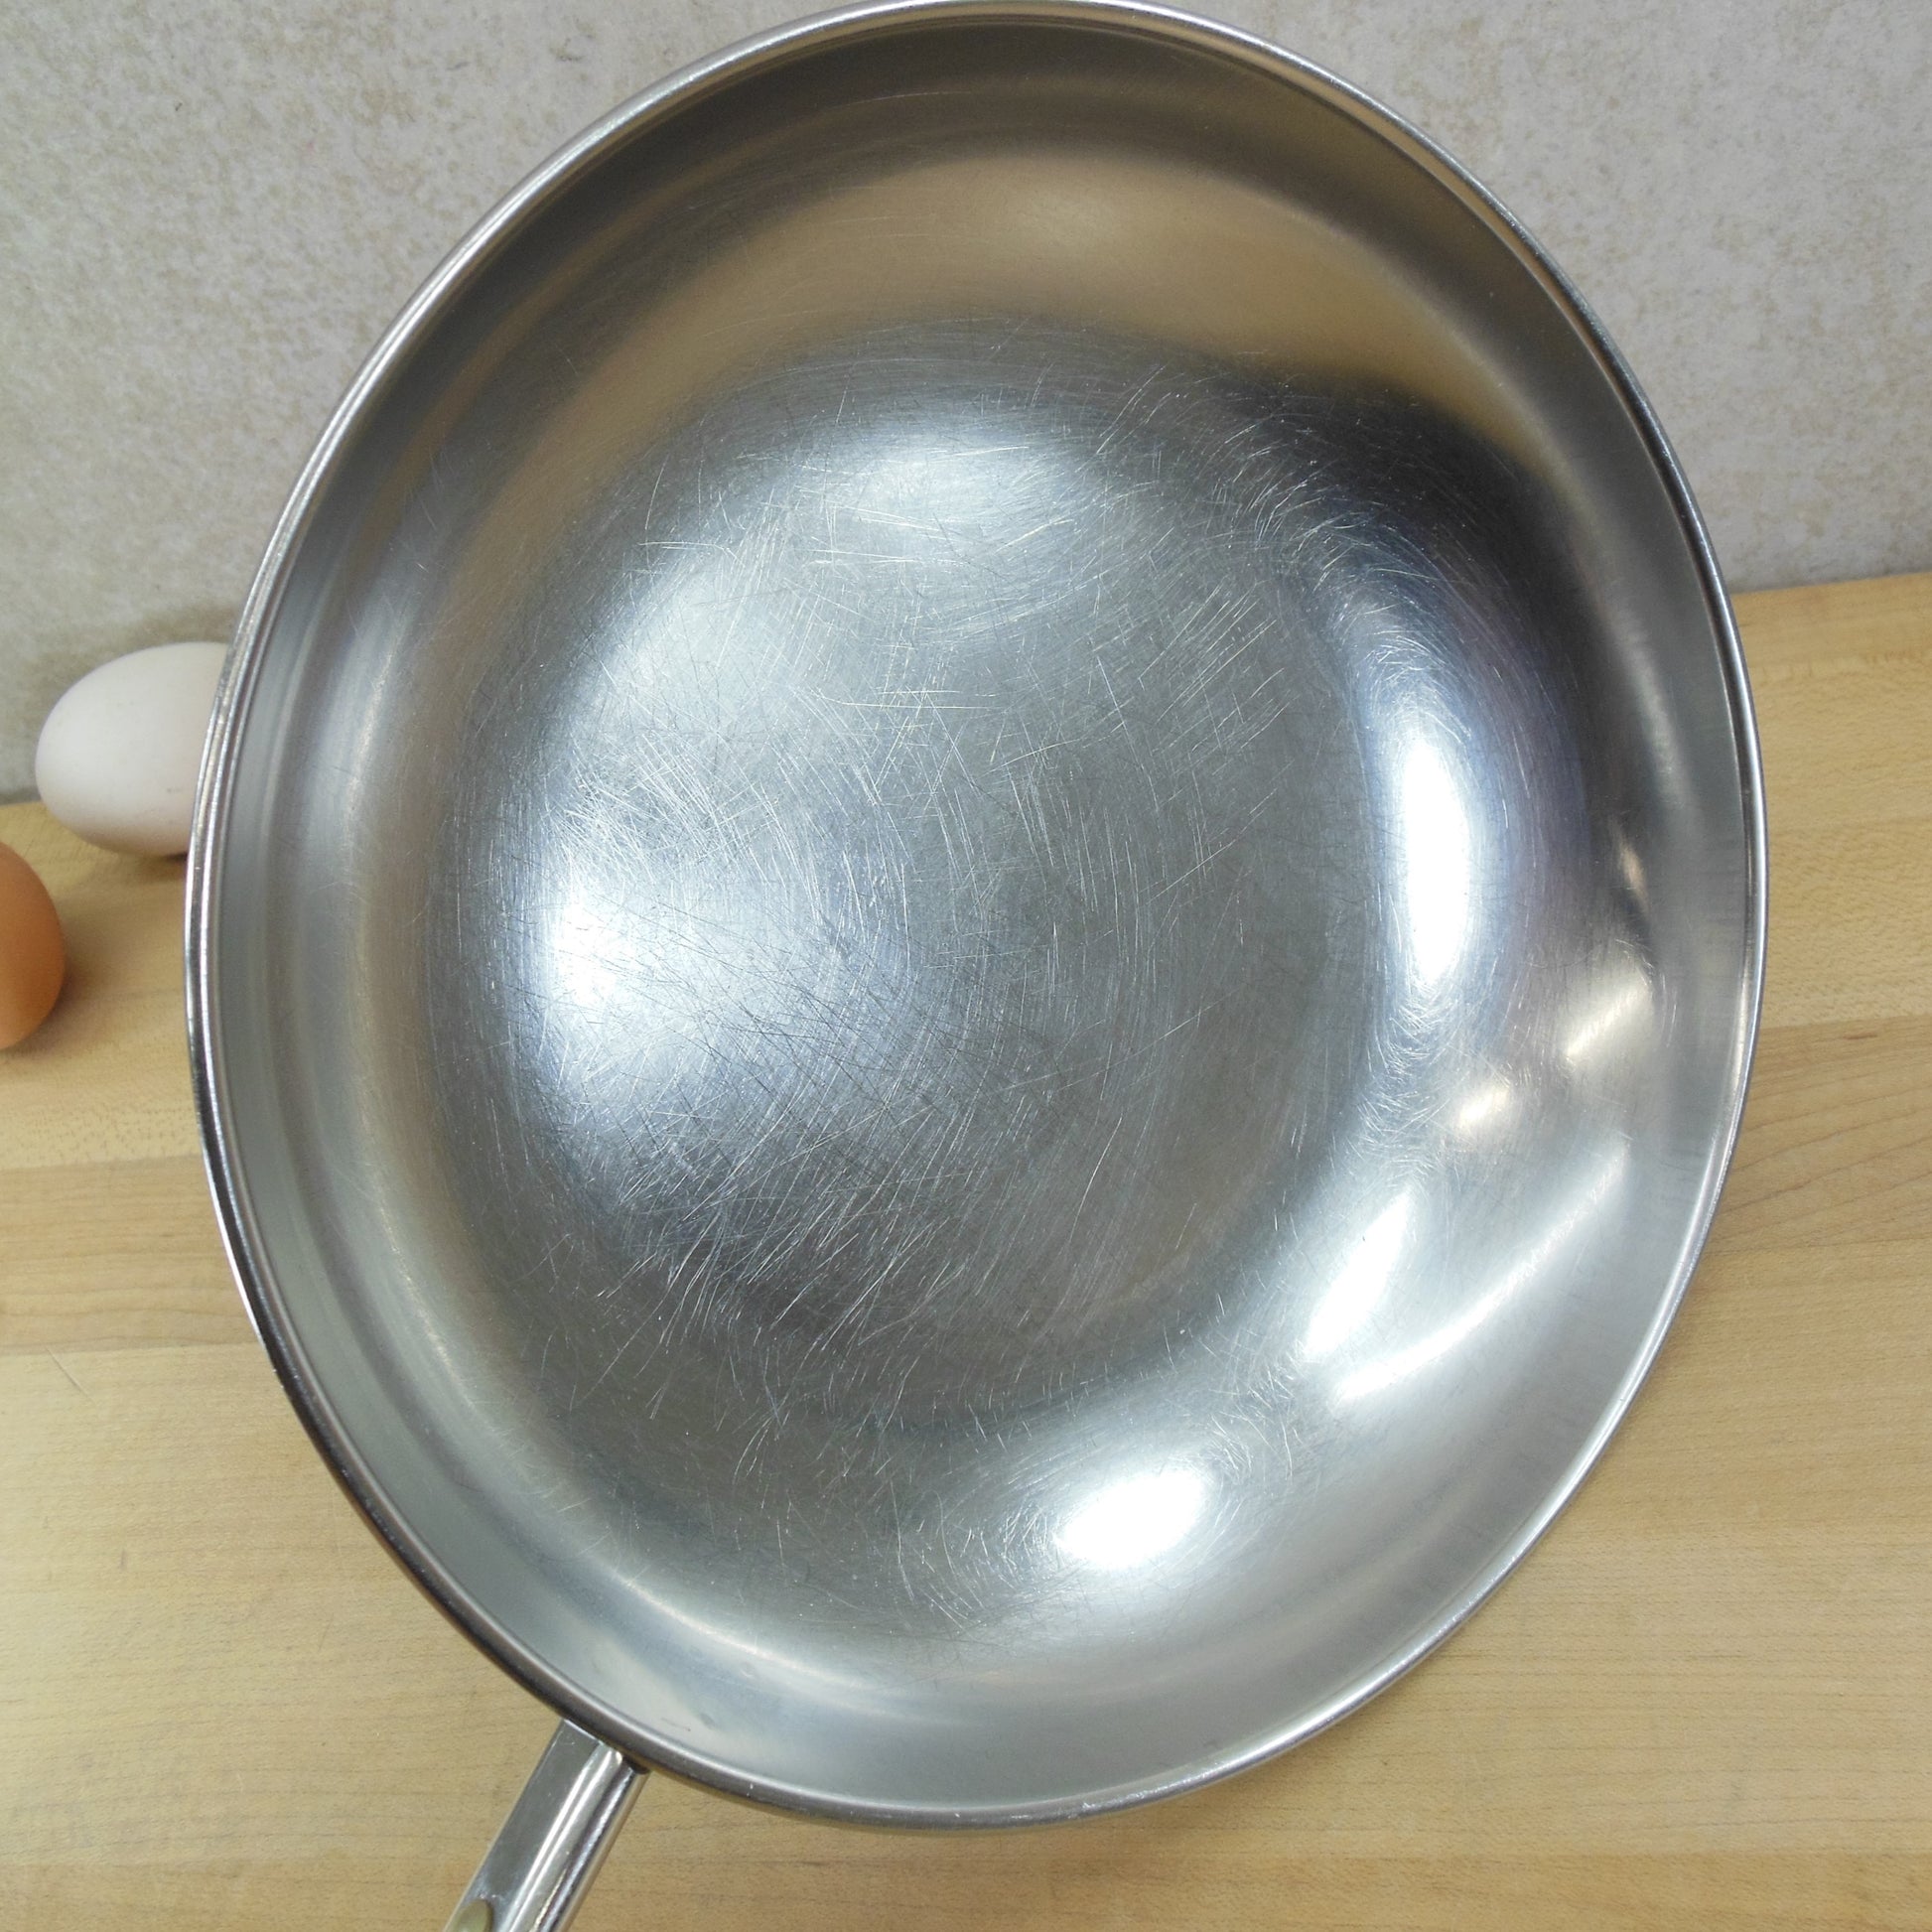 Revere Ware USA 8" Omelet Pan Stainless Steel Copper Clad used